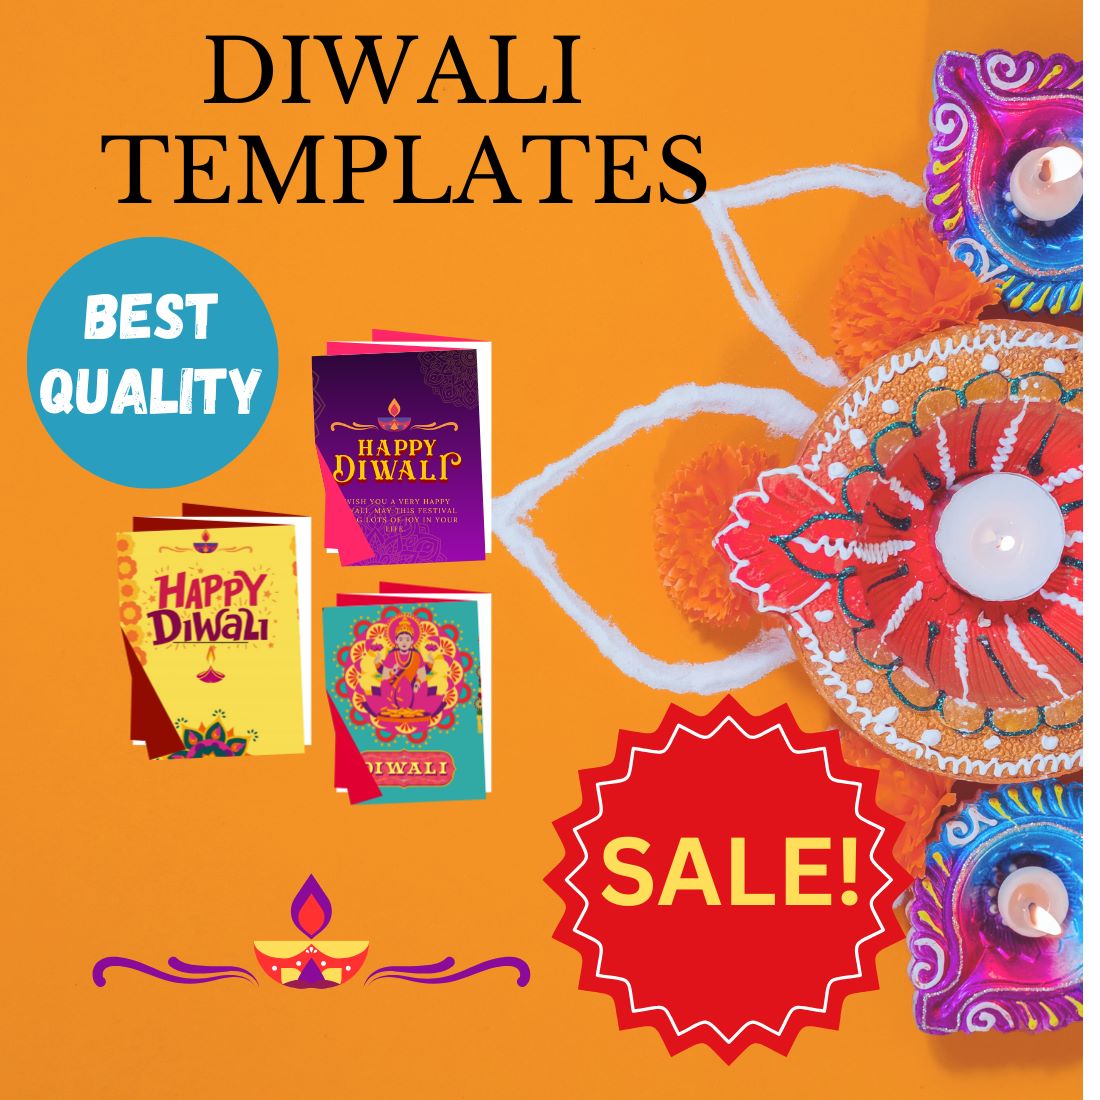 BEST QUALITY DIWALI TEMPLATES cover image.